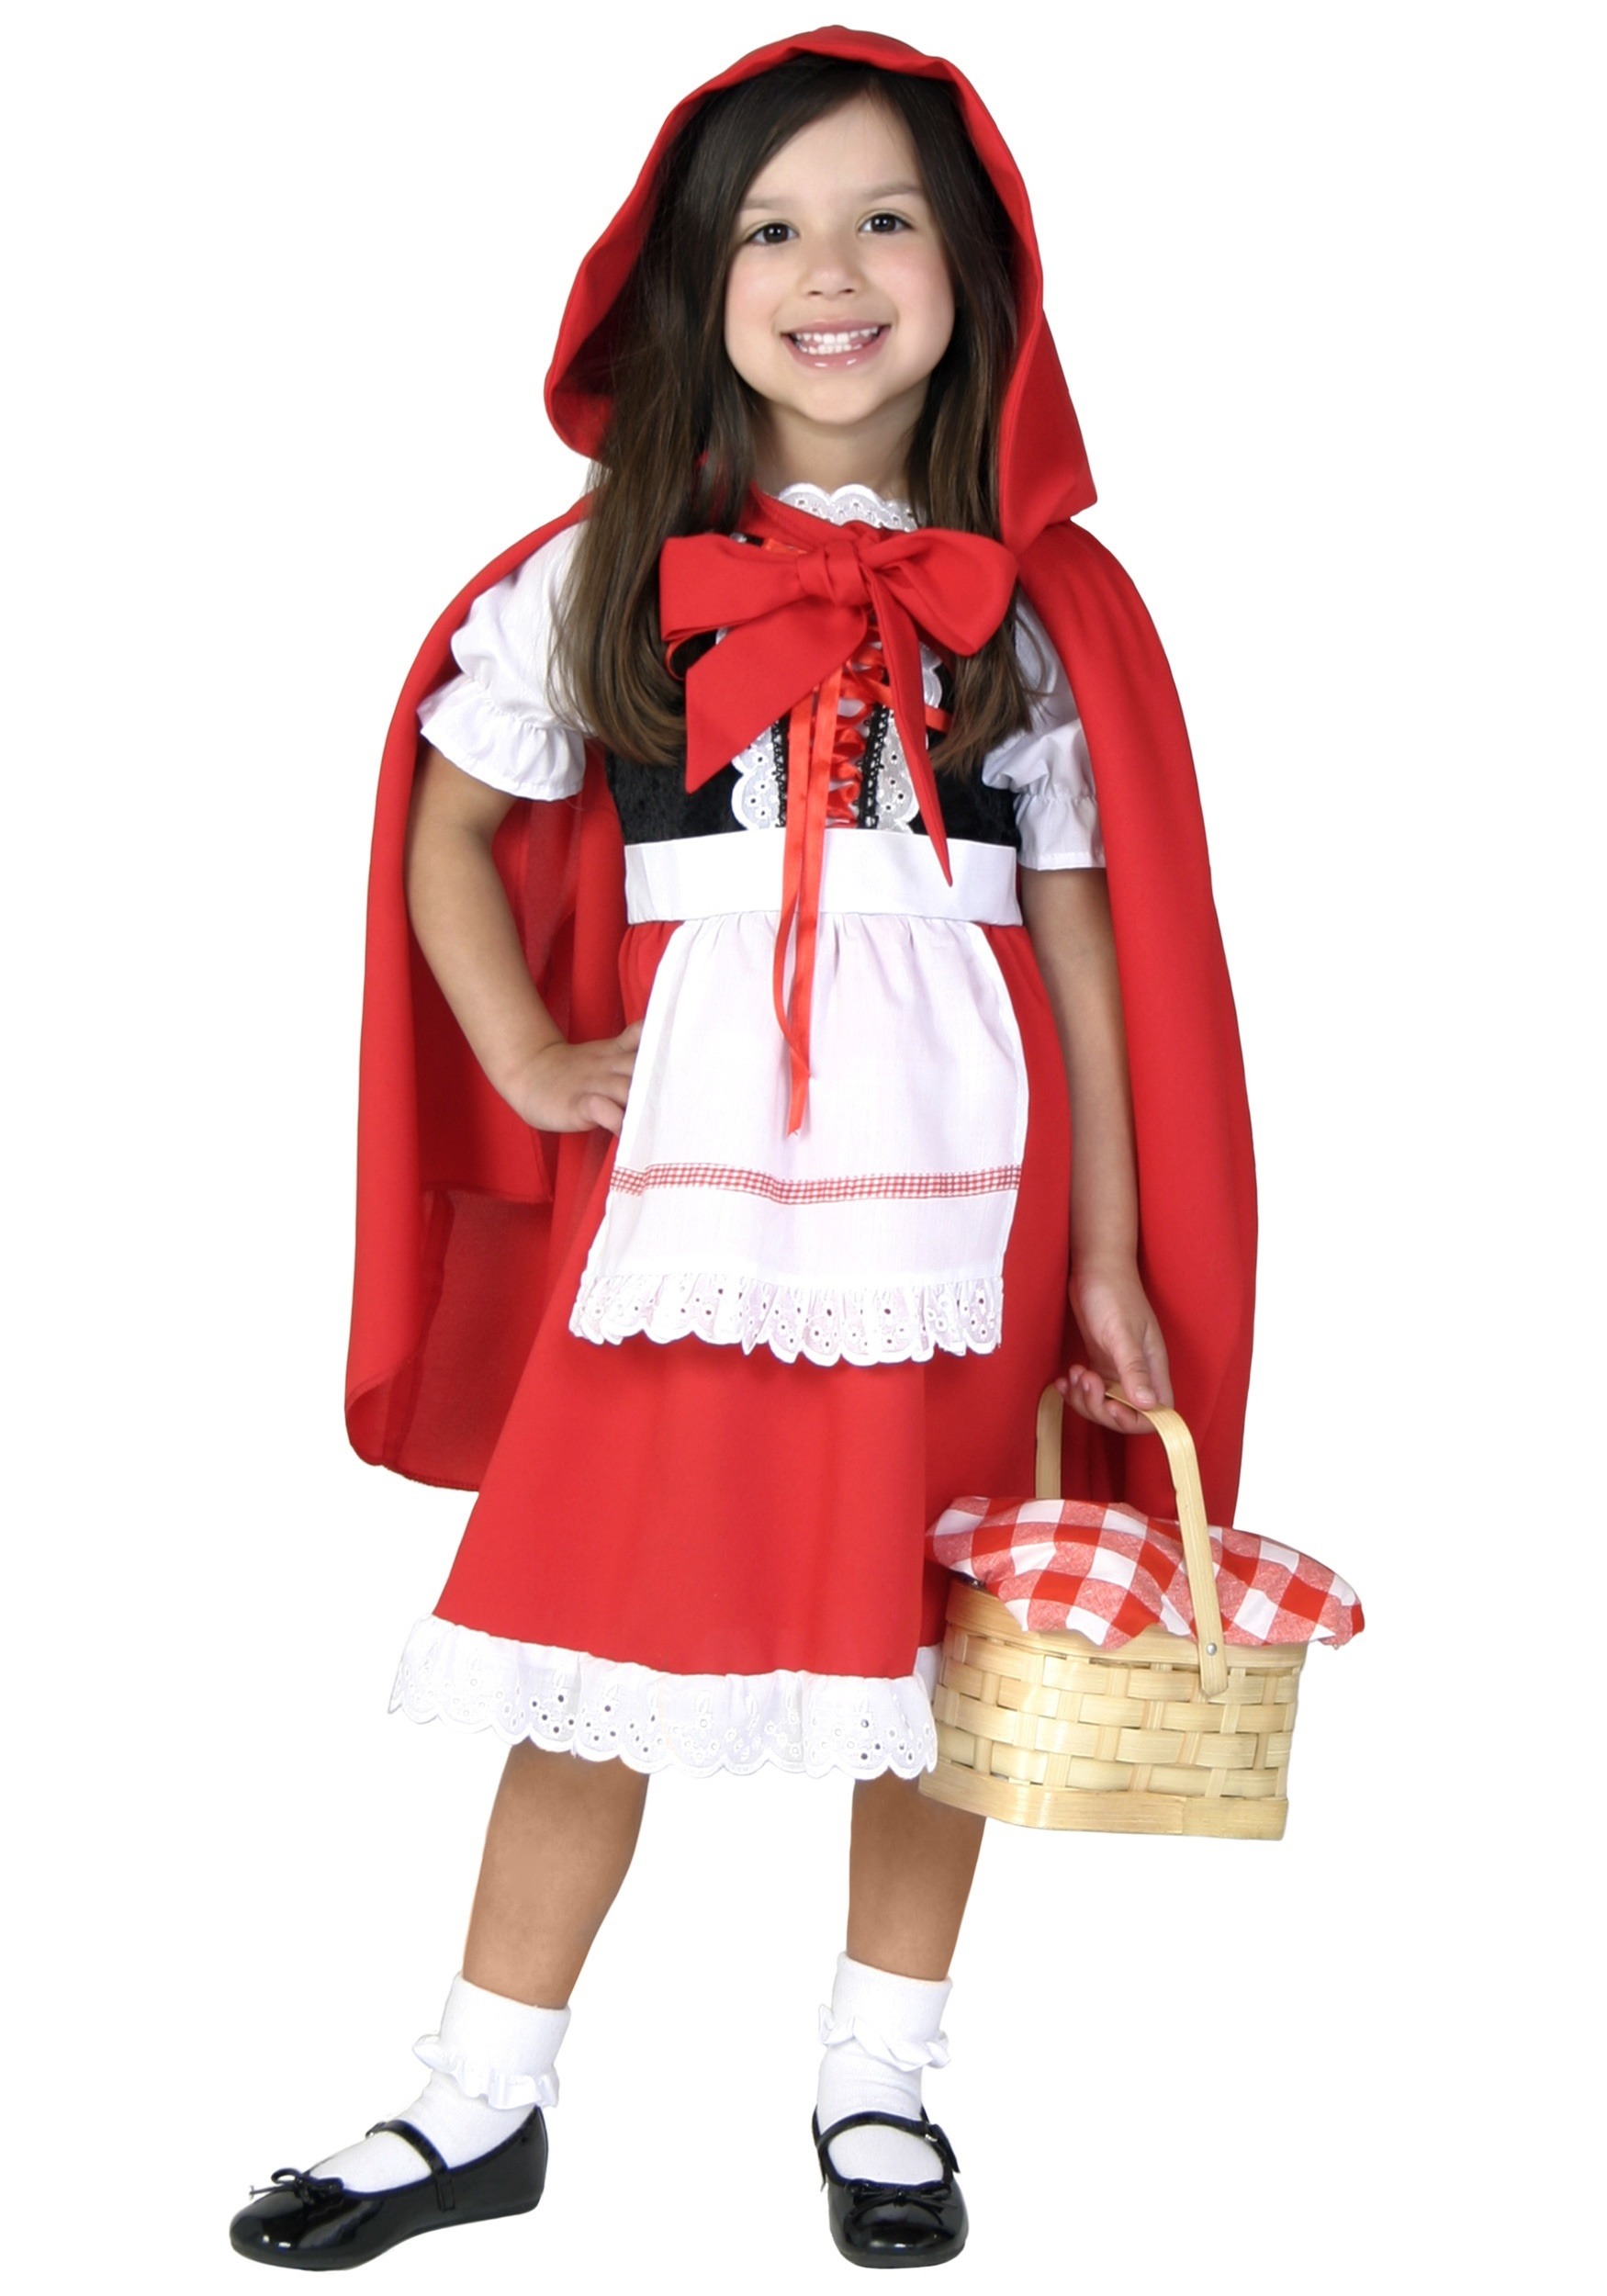 Photos - Fancy Dress Deluxe FUN Costumes Kids Red Riding Hood Costume Black/Red/White FUN2065C 